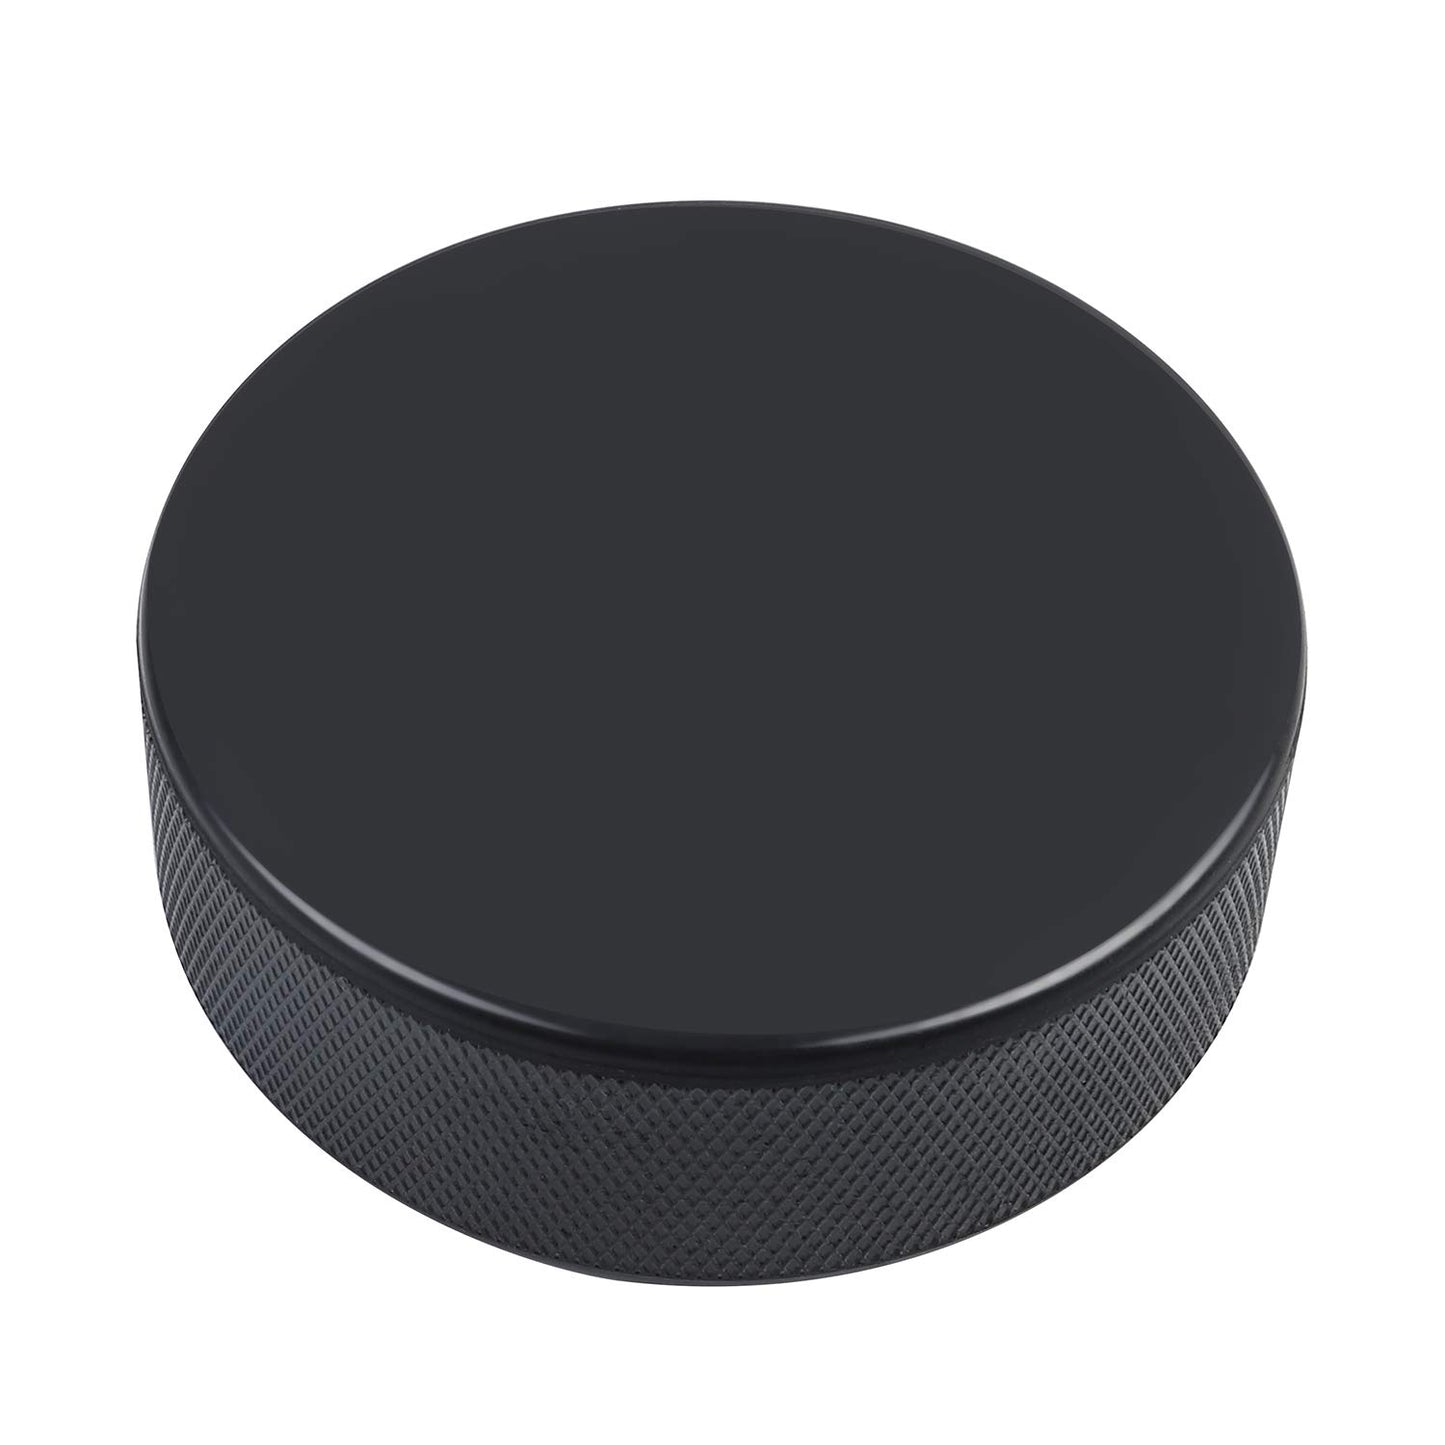 Golden Sport Ice Hockey Pucks, 25pcs, Official Regulation, for Practicing and Classic Training, Diameter 3", Thickness 1", 6oz, Black